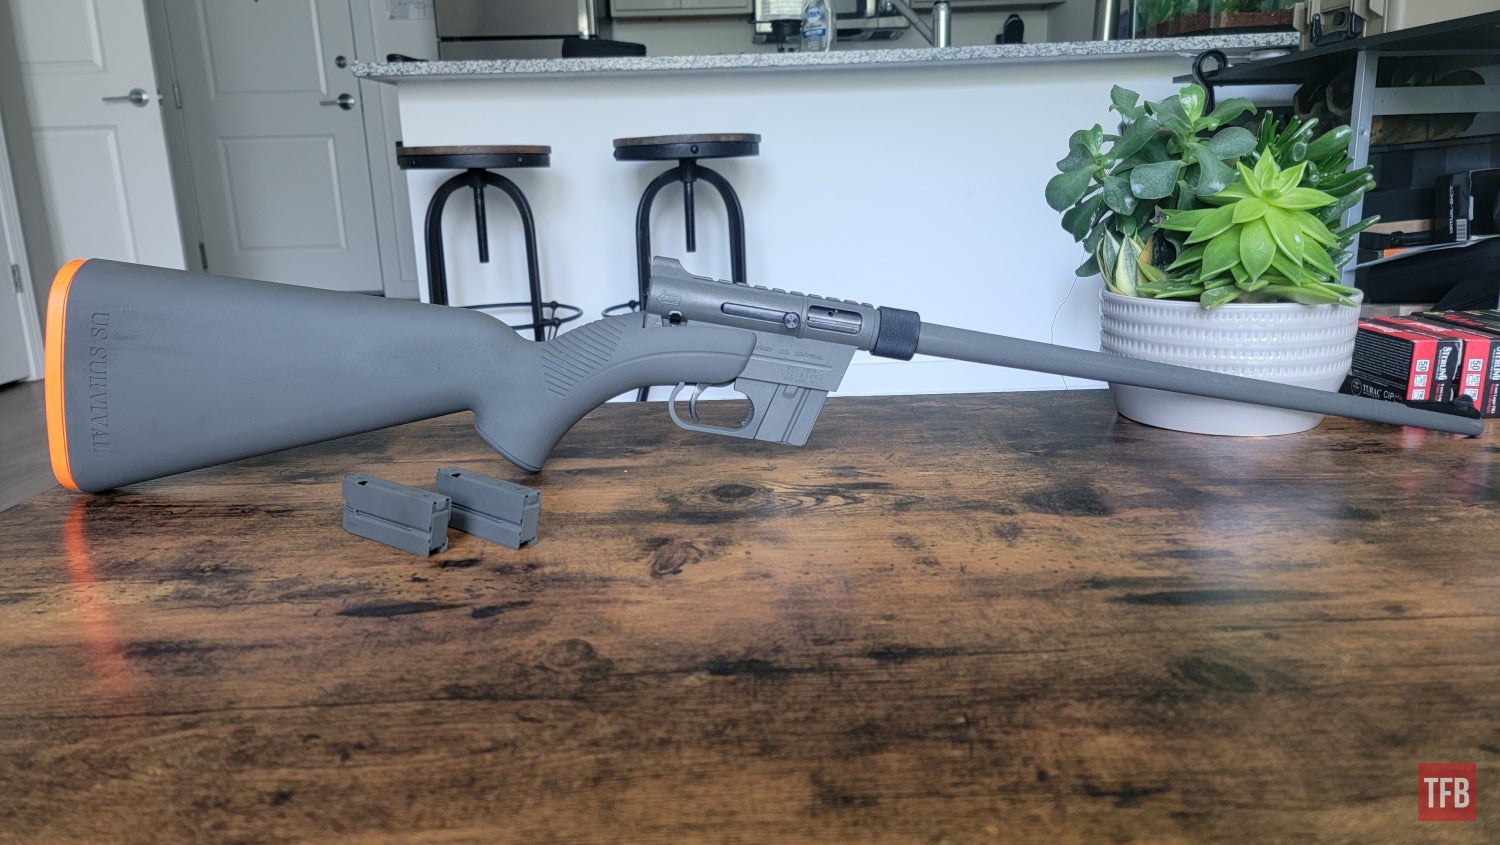 The Rimfire Report: The Best DIY Upgrade You Can Make to Your Henry AR-7